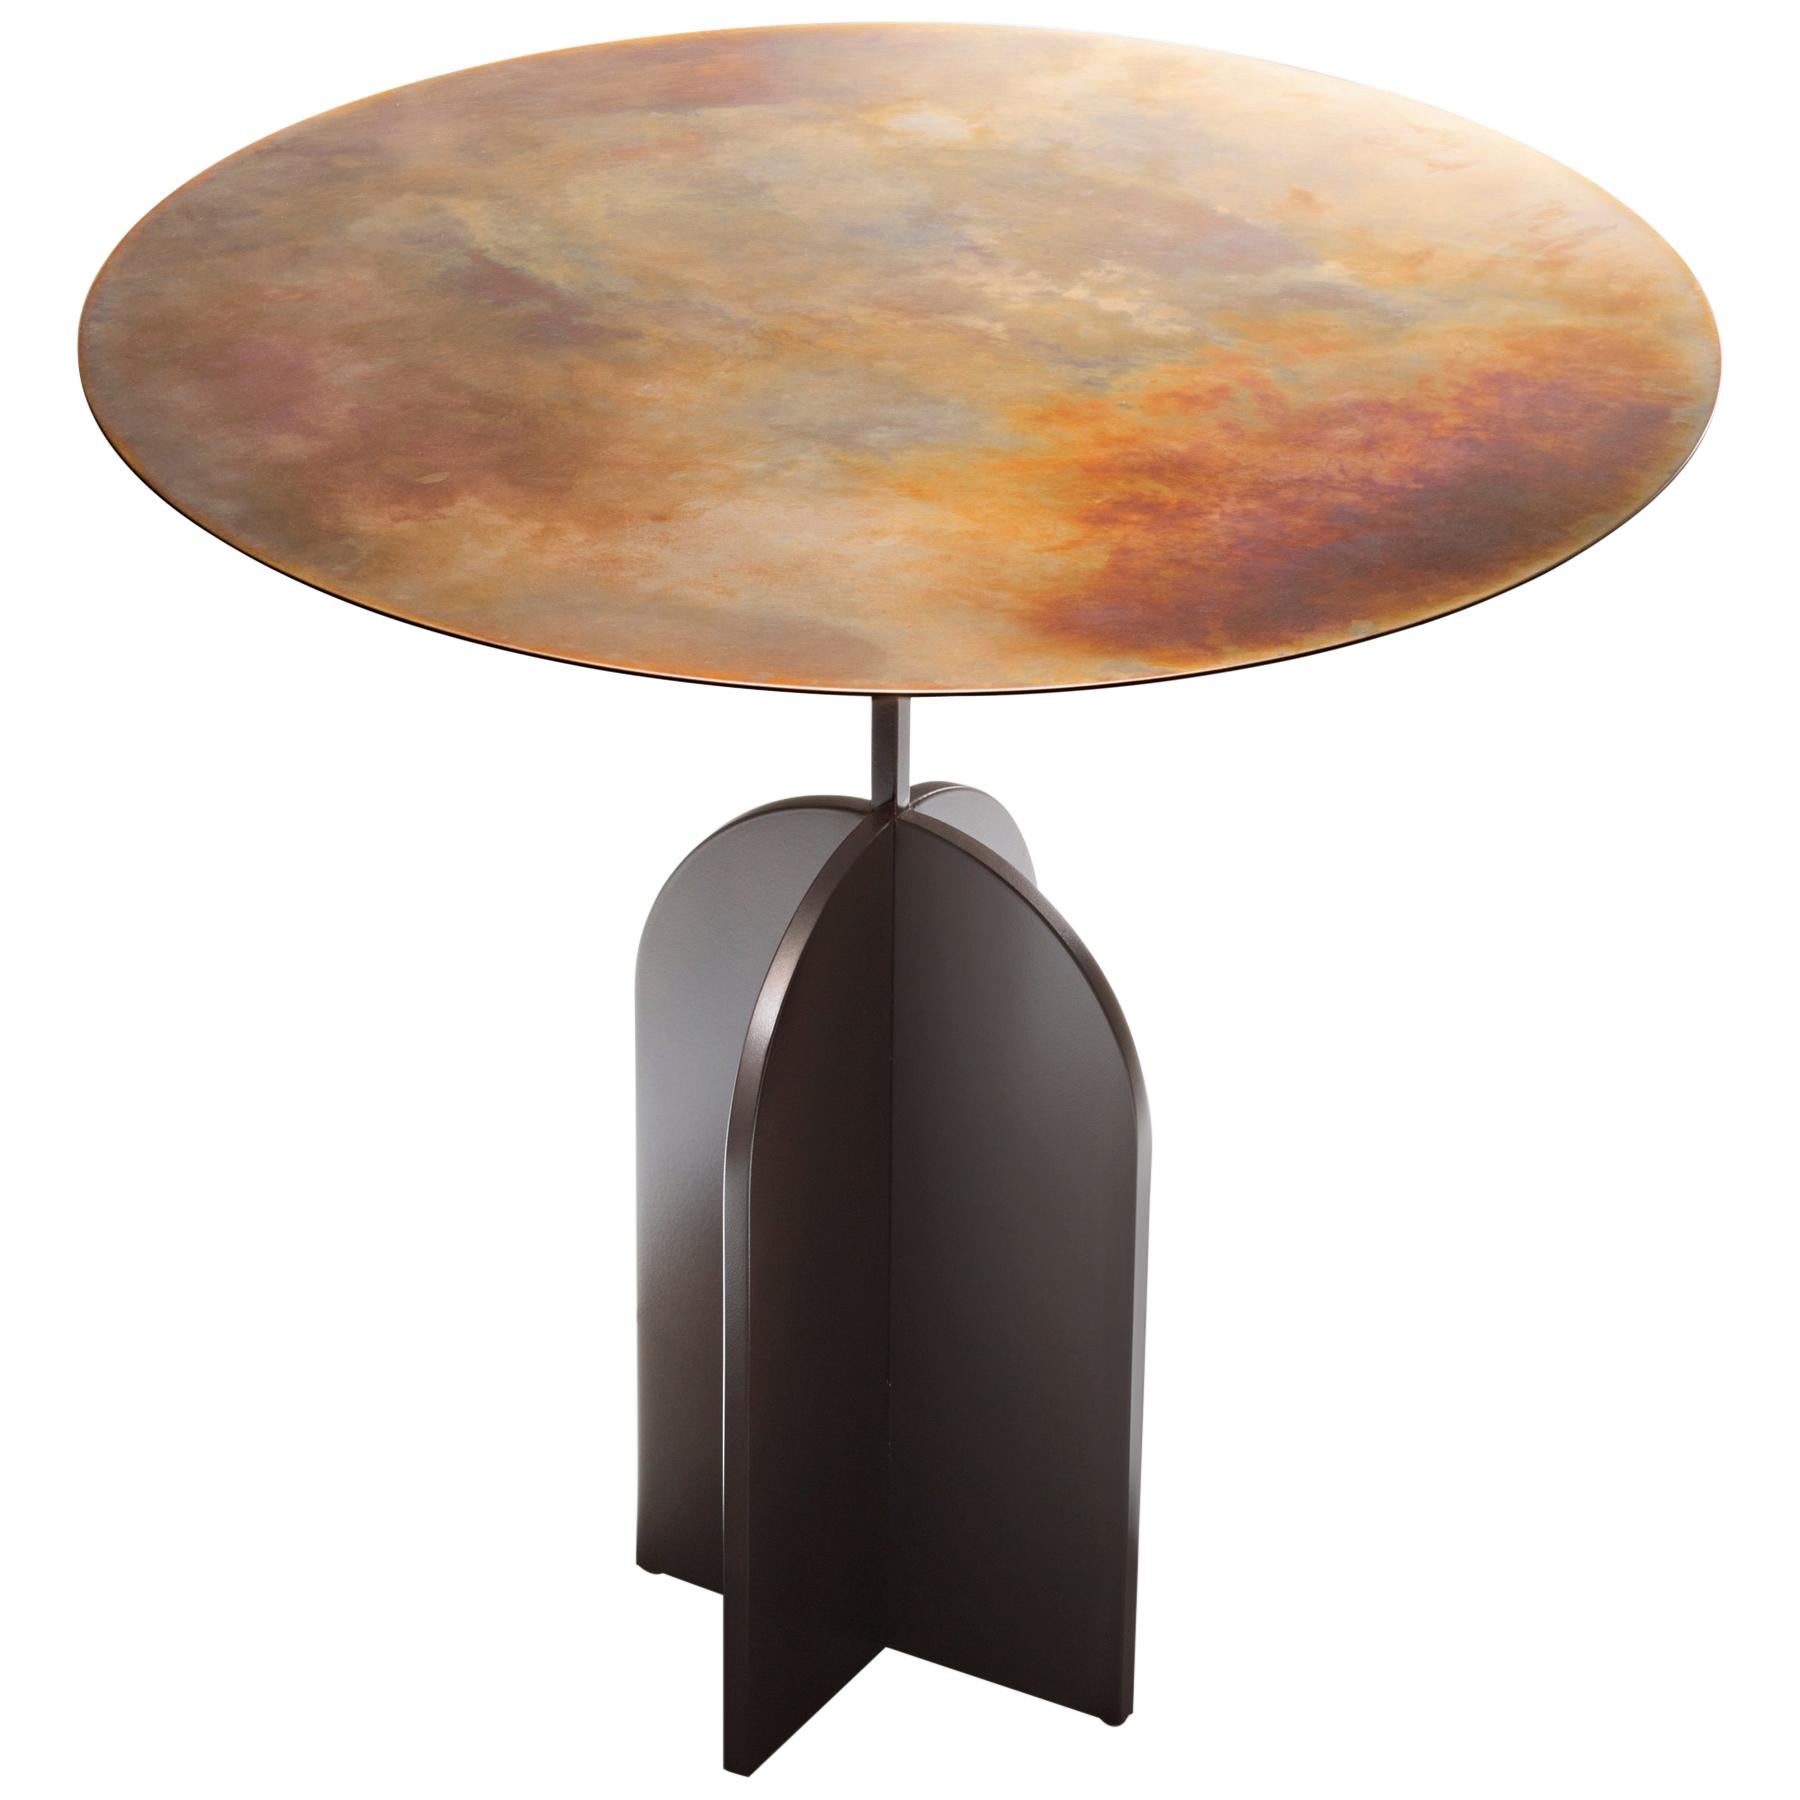 DeCastelli Nicola 45 Coffee Table in Copper Top by IvDesign